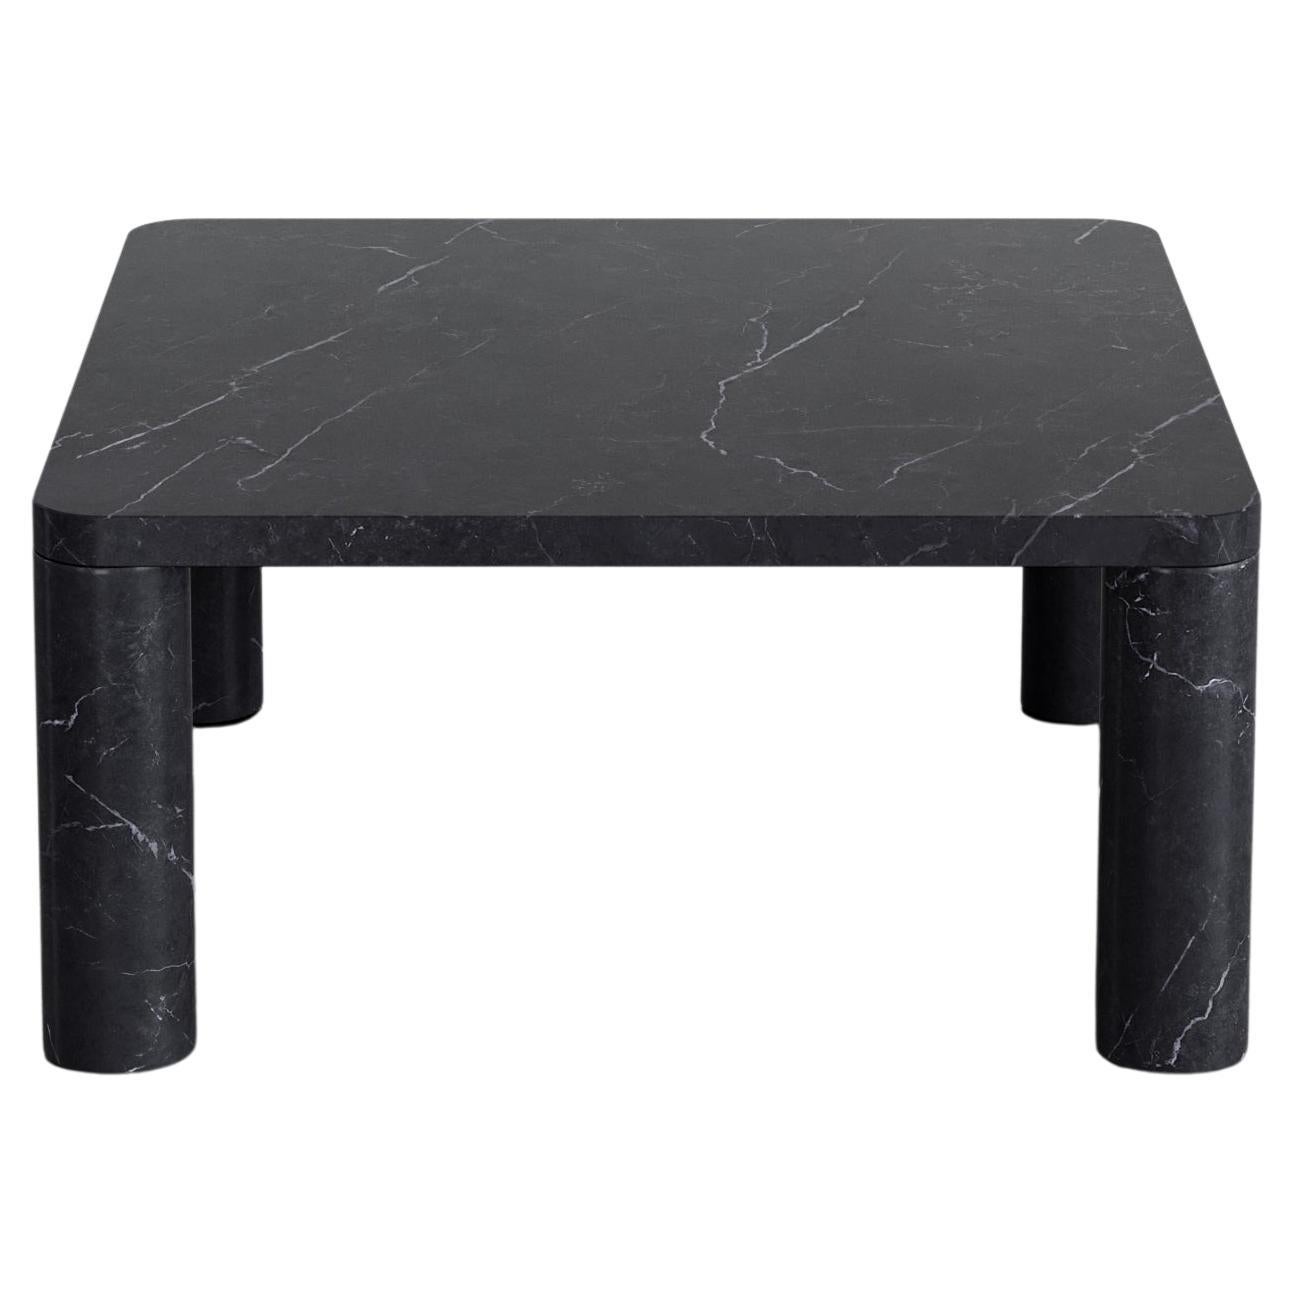 Nadia 70 coffee table by Agglomerati 
Dimensions: D 70 x W 70 x H 33 cm 
Materials: Black Marquina. Available in other stones. 

Agglomerati is a London-based studio creating distinctive stone furniture. Established in 2019 by Australian